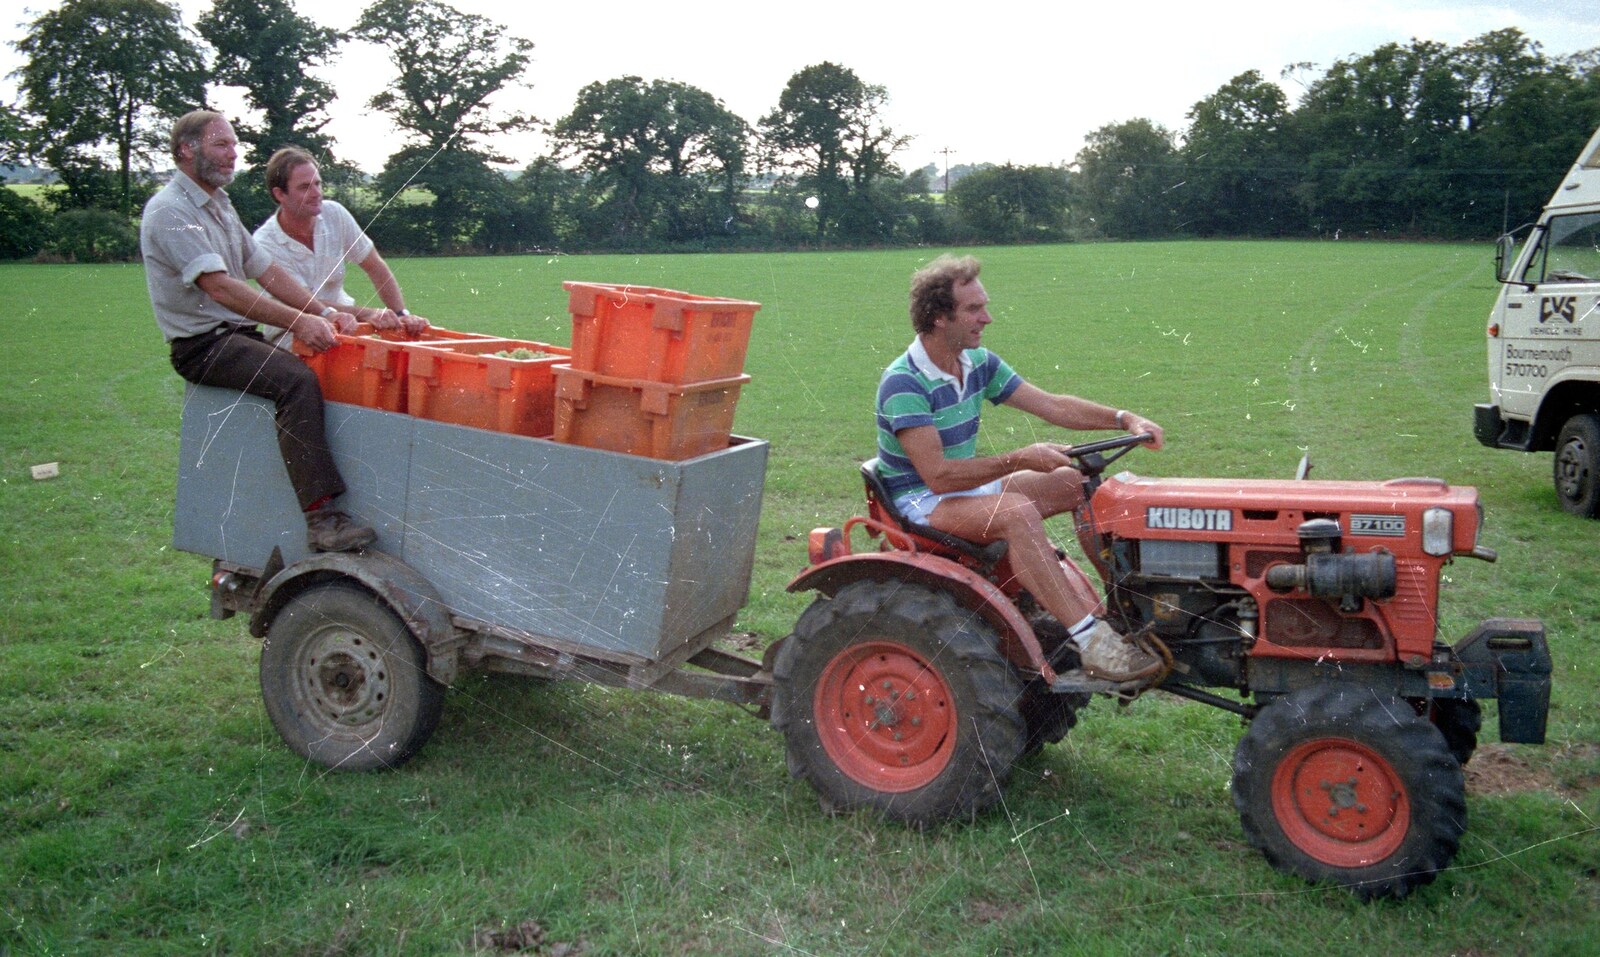 Mike hauls around some crates with the tractor from Harrow Vineyard Harvest and Wootton Winery, Dorset and Somerset - 5th September 1989